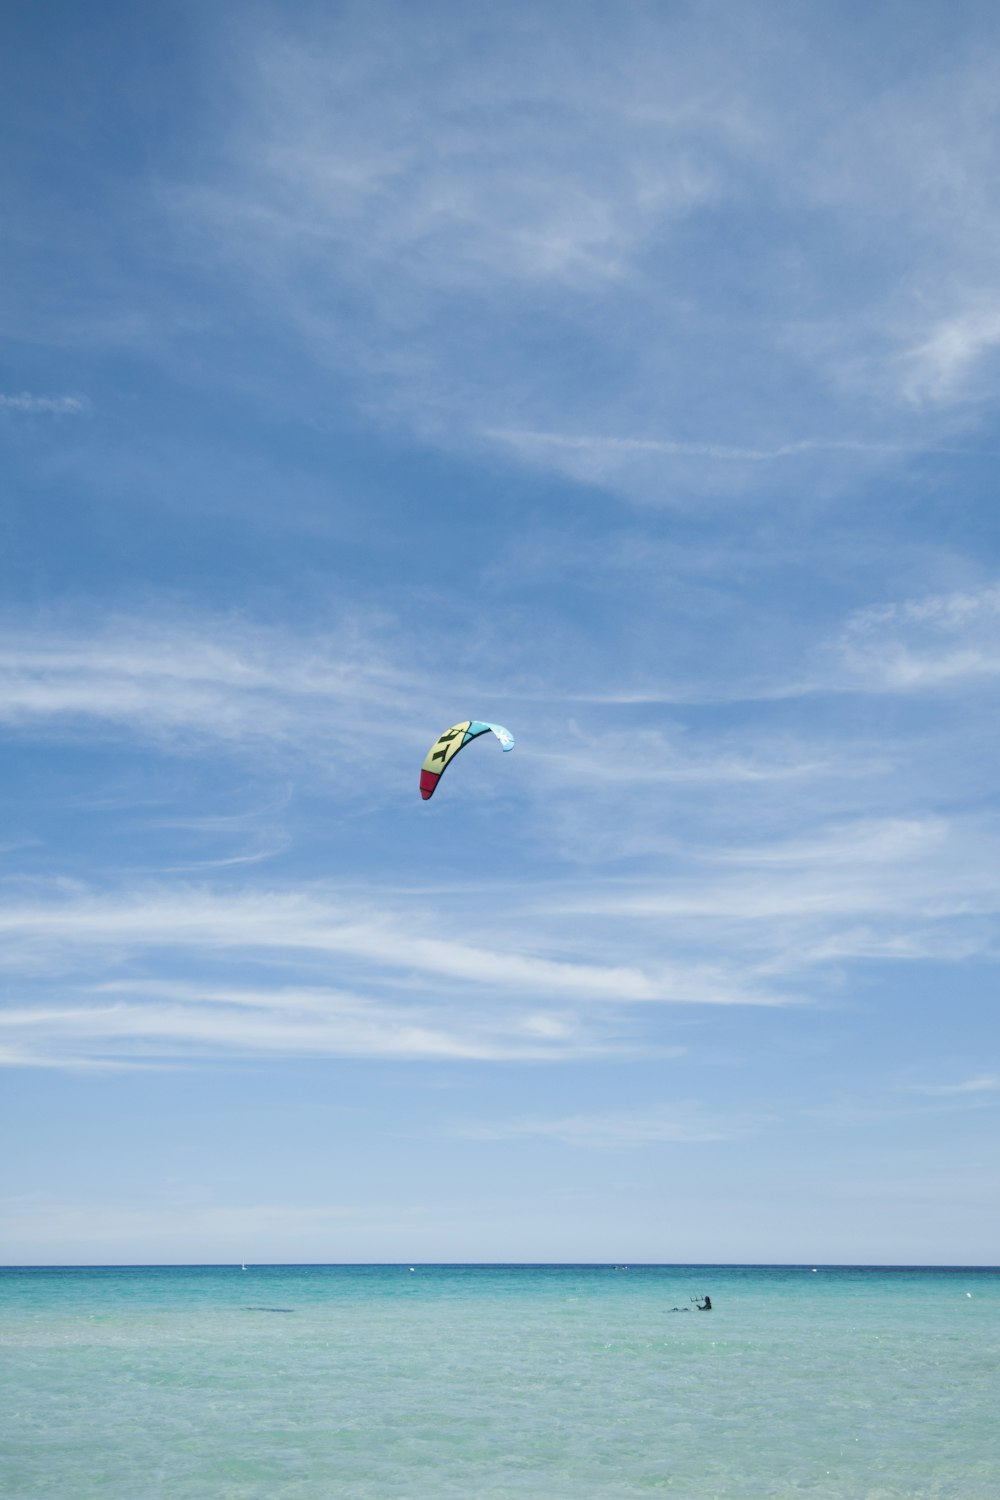 person paragliding under blue and white skies during daytime